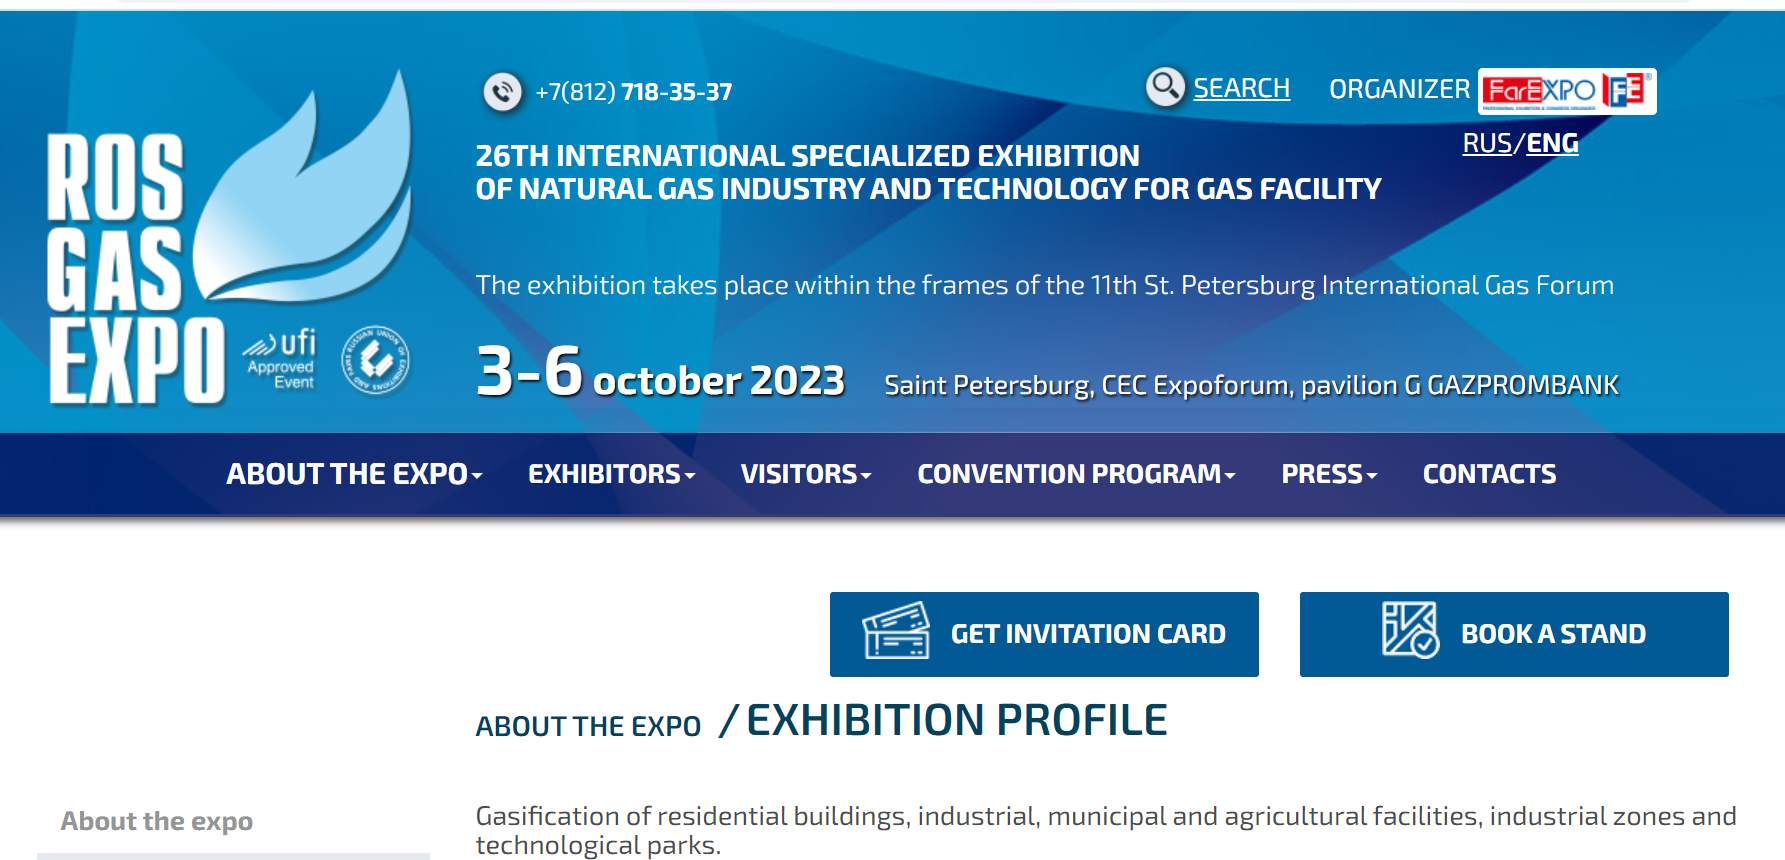 SINOCLEANSKY WILL PARTICIPATE 26th ROS GAS EXPO At BOOTH NO. A7